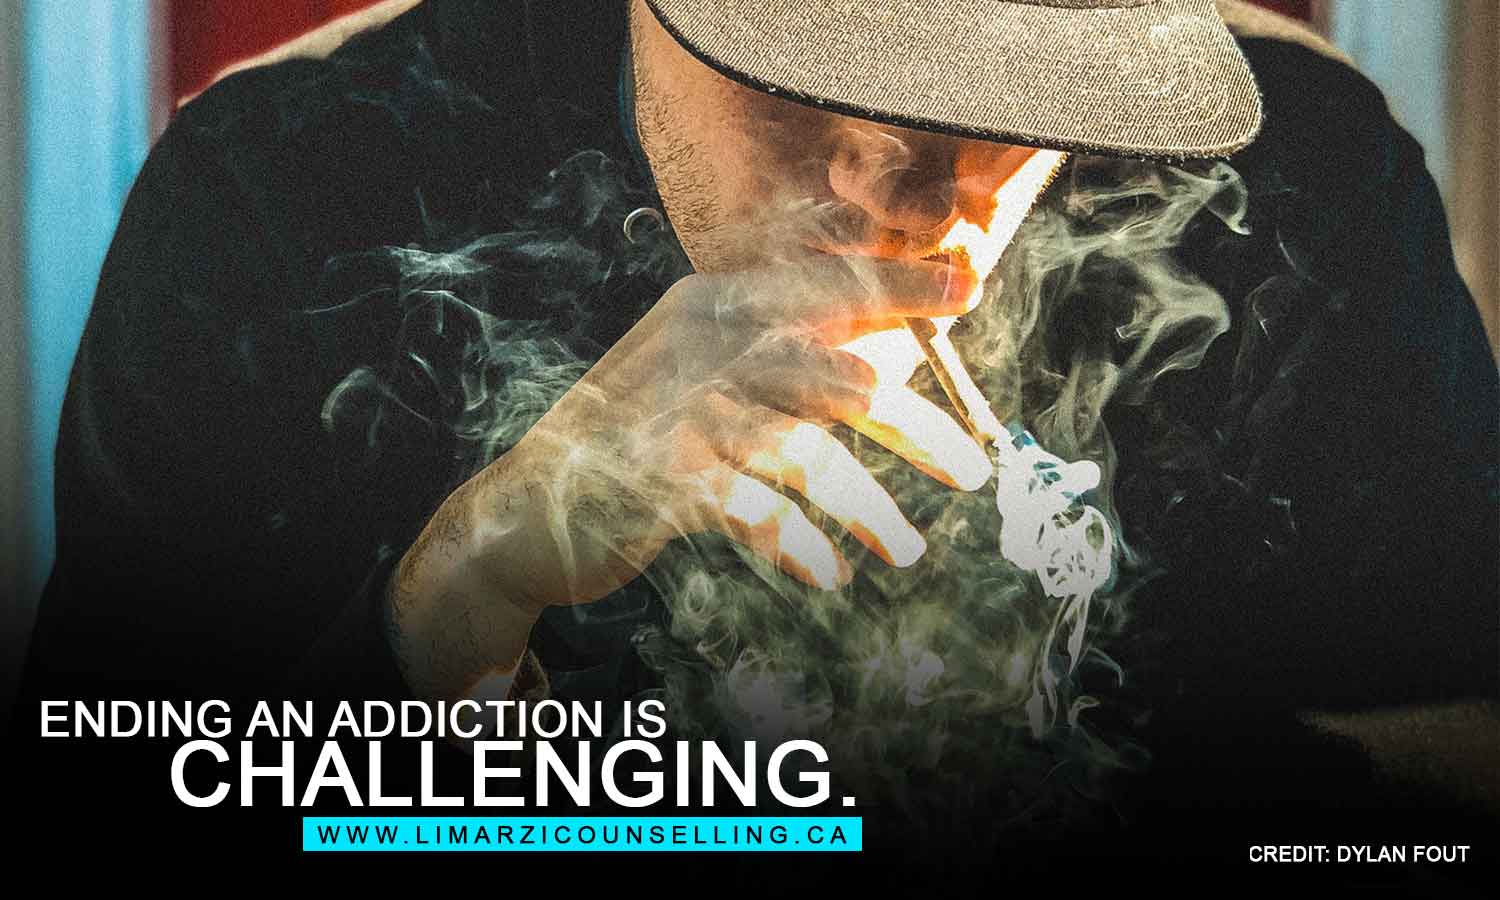 Ending an addiction is challenging.